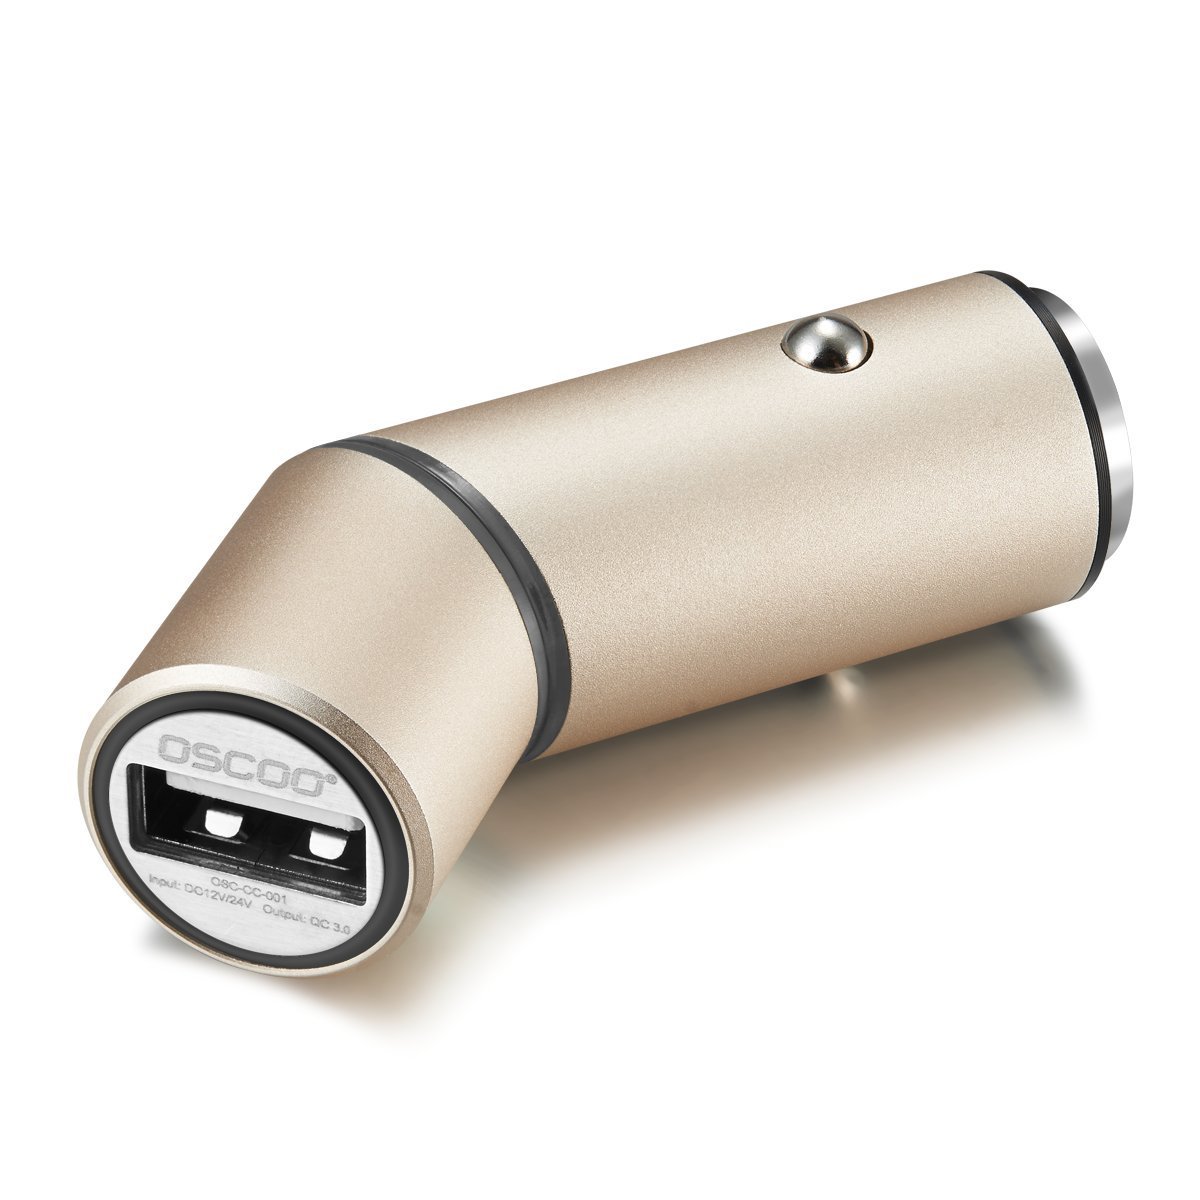 Oscoo rotatable quick charge USB car charger for $10